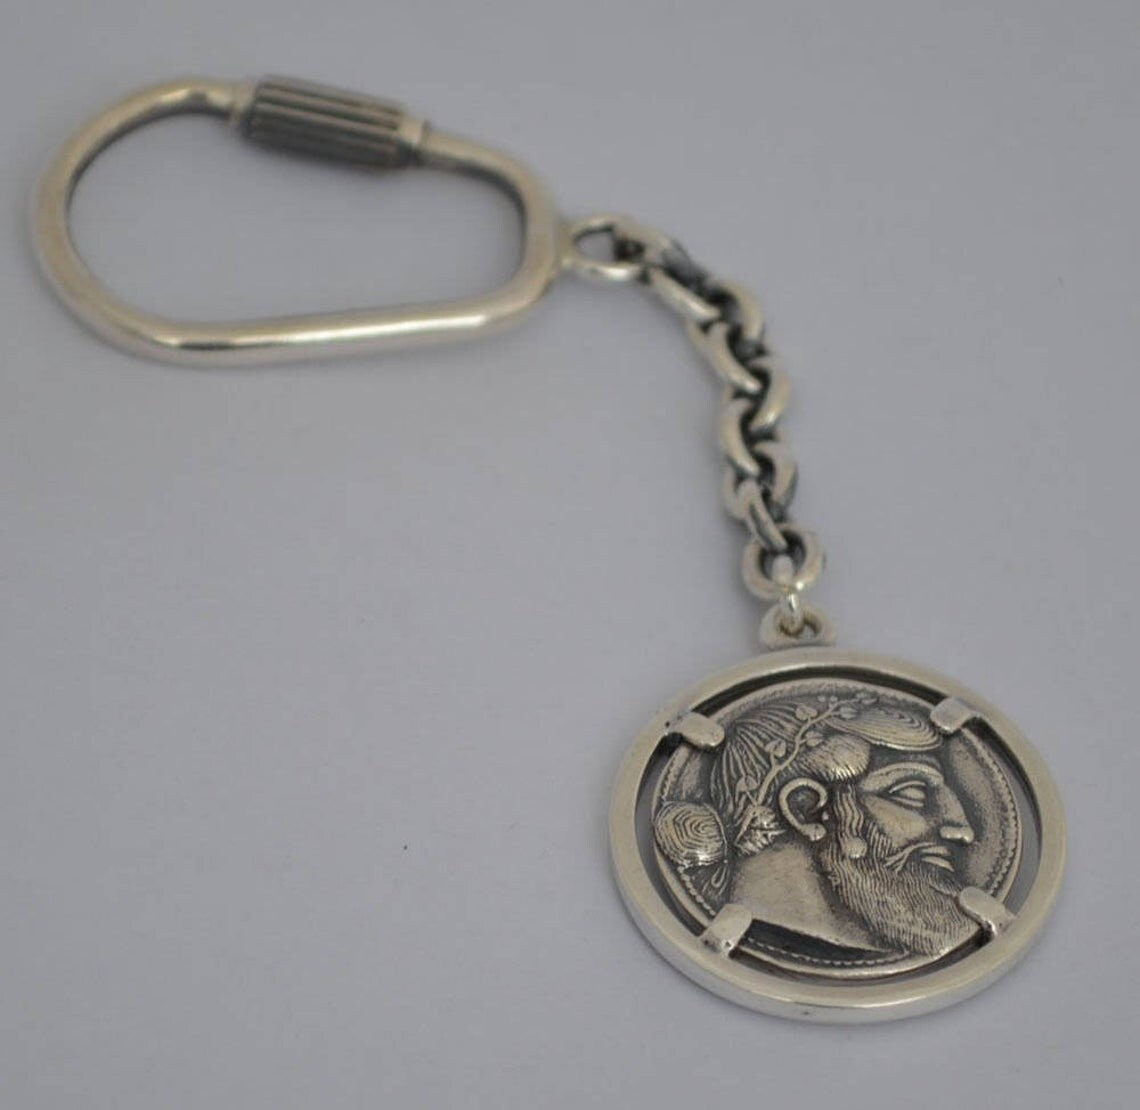 Silenus holding a kantharos and Dionysus, God of Wine - tetradrachm from Naxos, Sicily (461–450 BC) - Keychain - 925 Sterling Silver